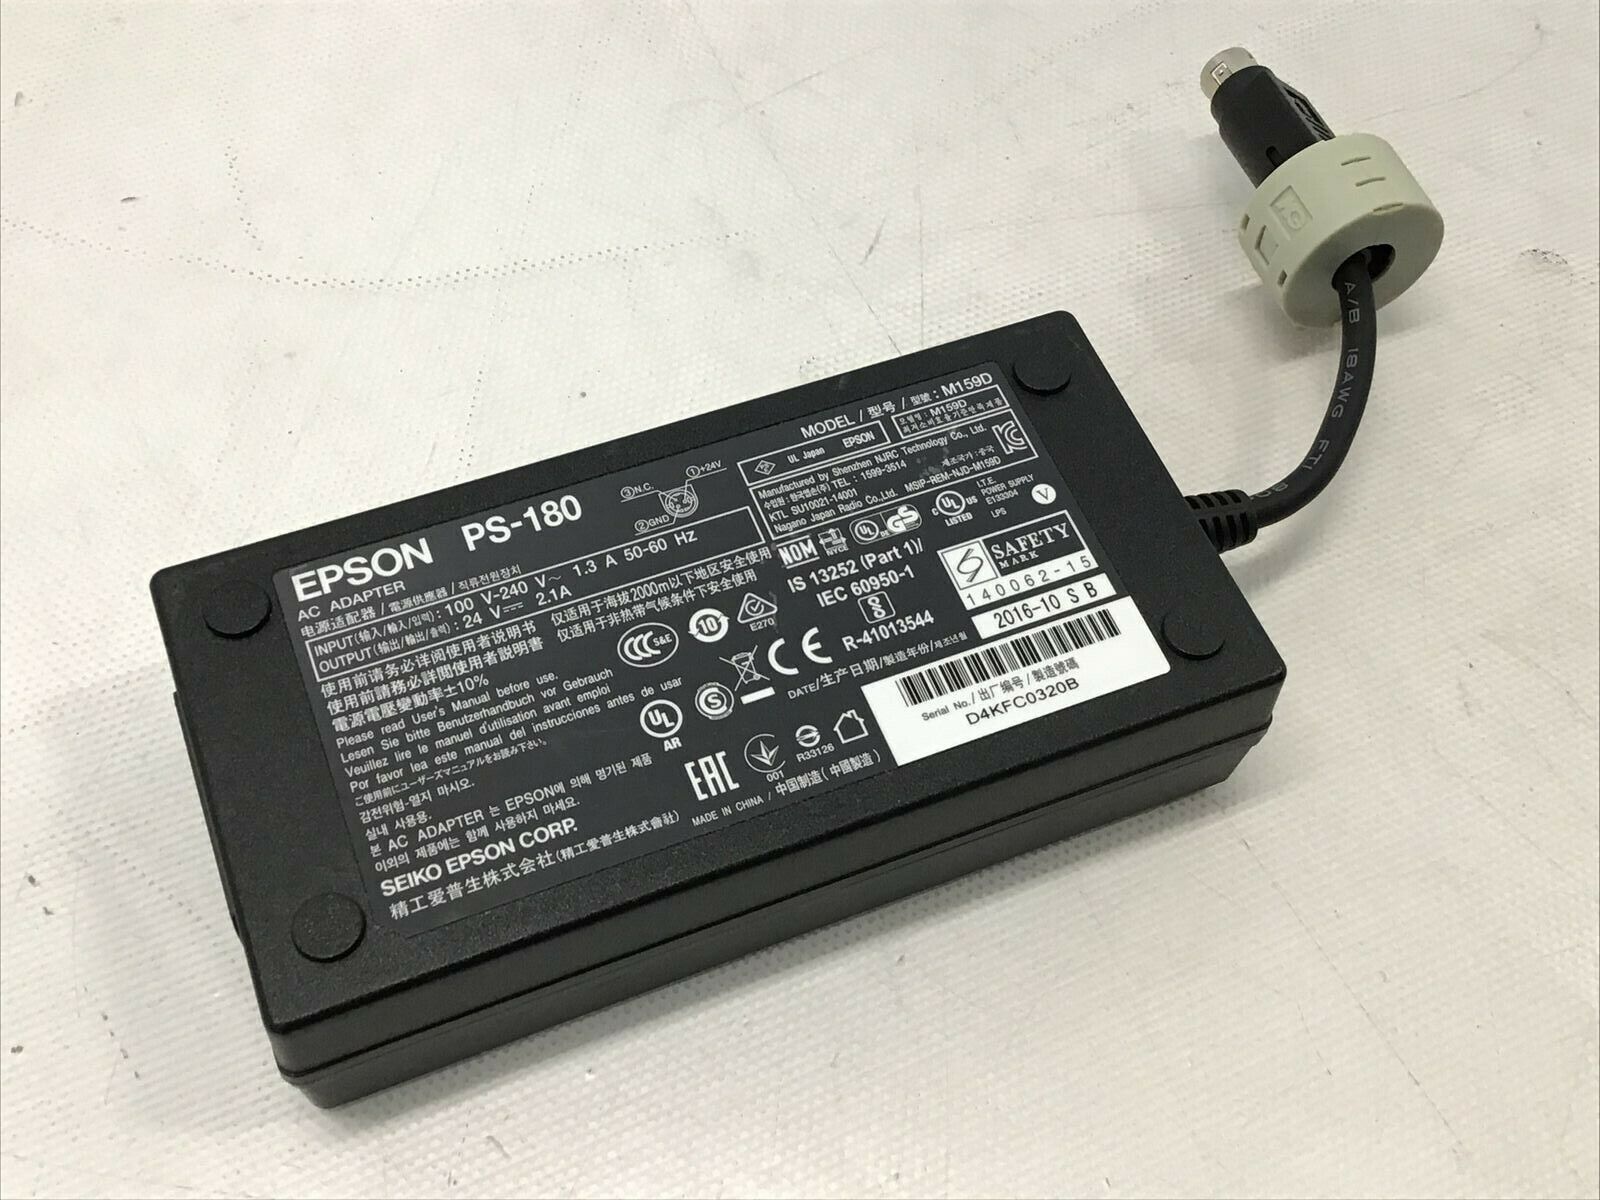 Epson PS-180 AC Adapter M159B M159A Printer C8255343 TM-T88V M244A Compatible Brand: EPSON Type: Epson PS-180 AC A - Click Image to Close